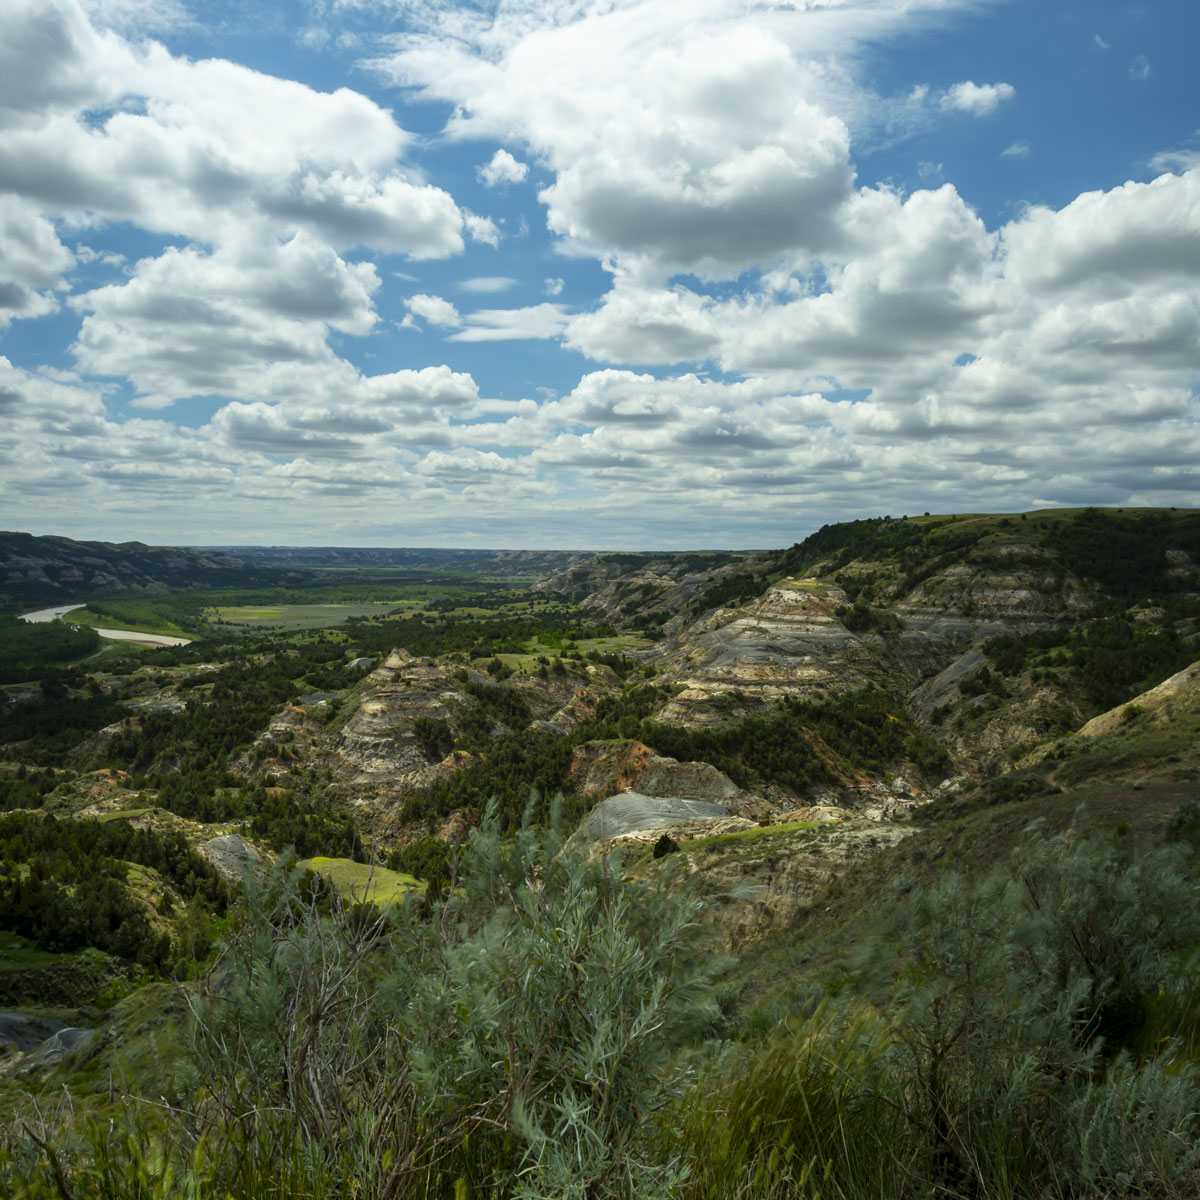 Under puffy white clouds and blue skies the greens and browns of the hills  and valleys in the canyon at Theodore Roosevelt National Park show the rugged natural beauty of the Badlands.